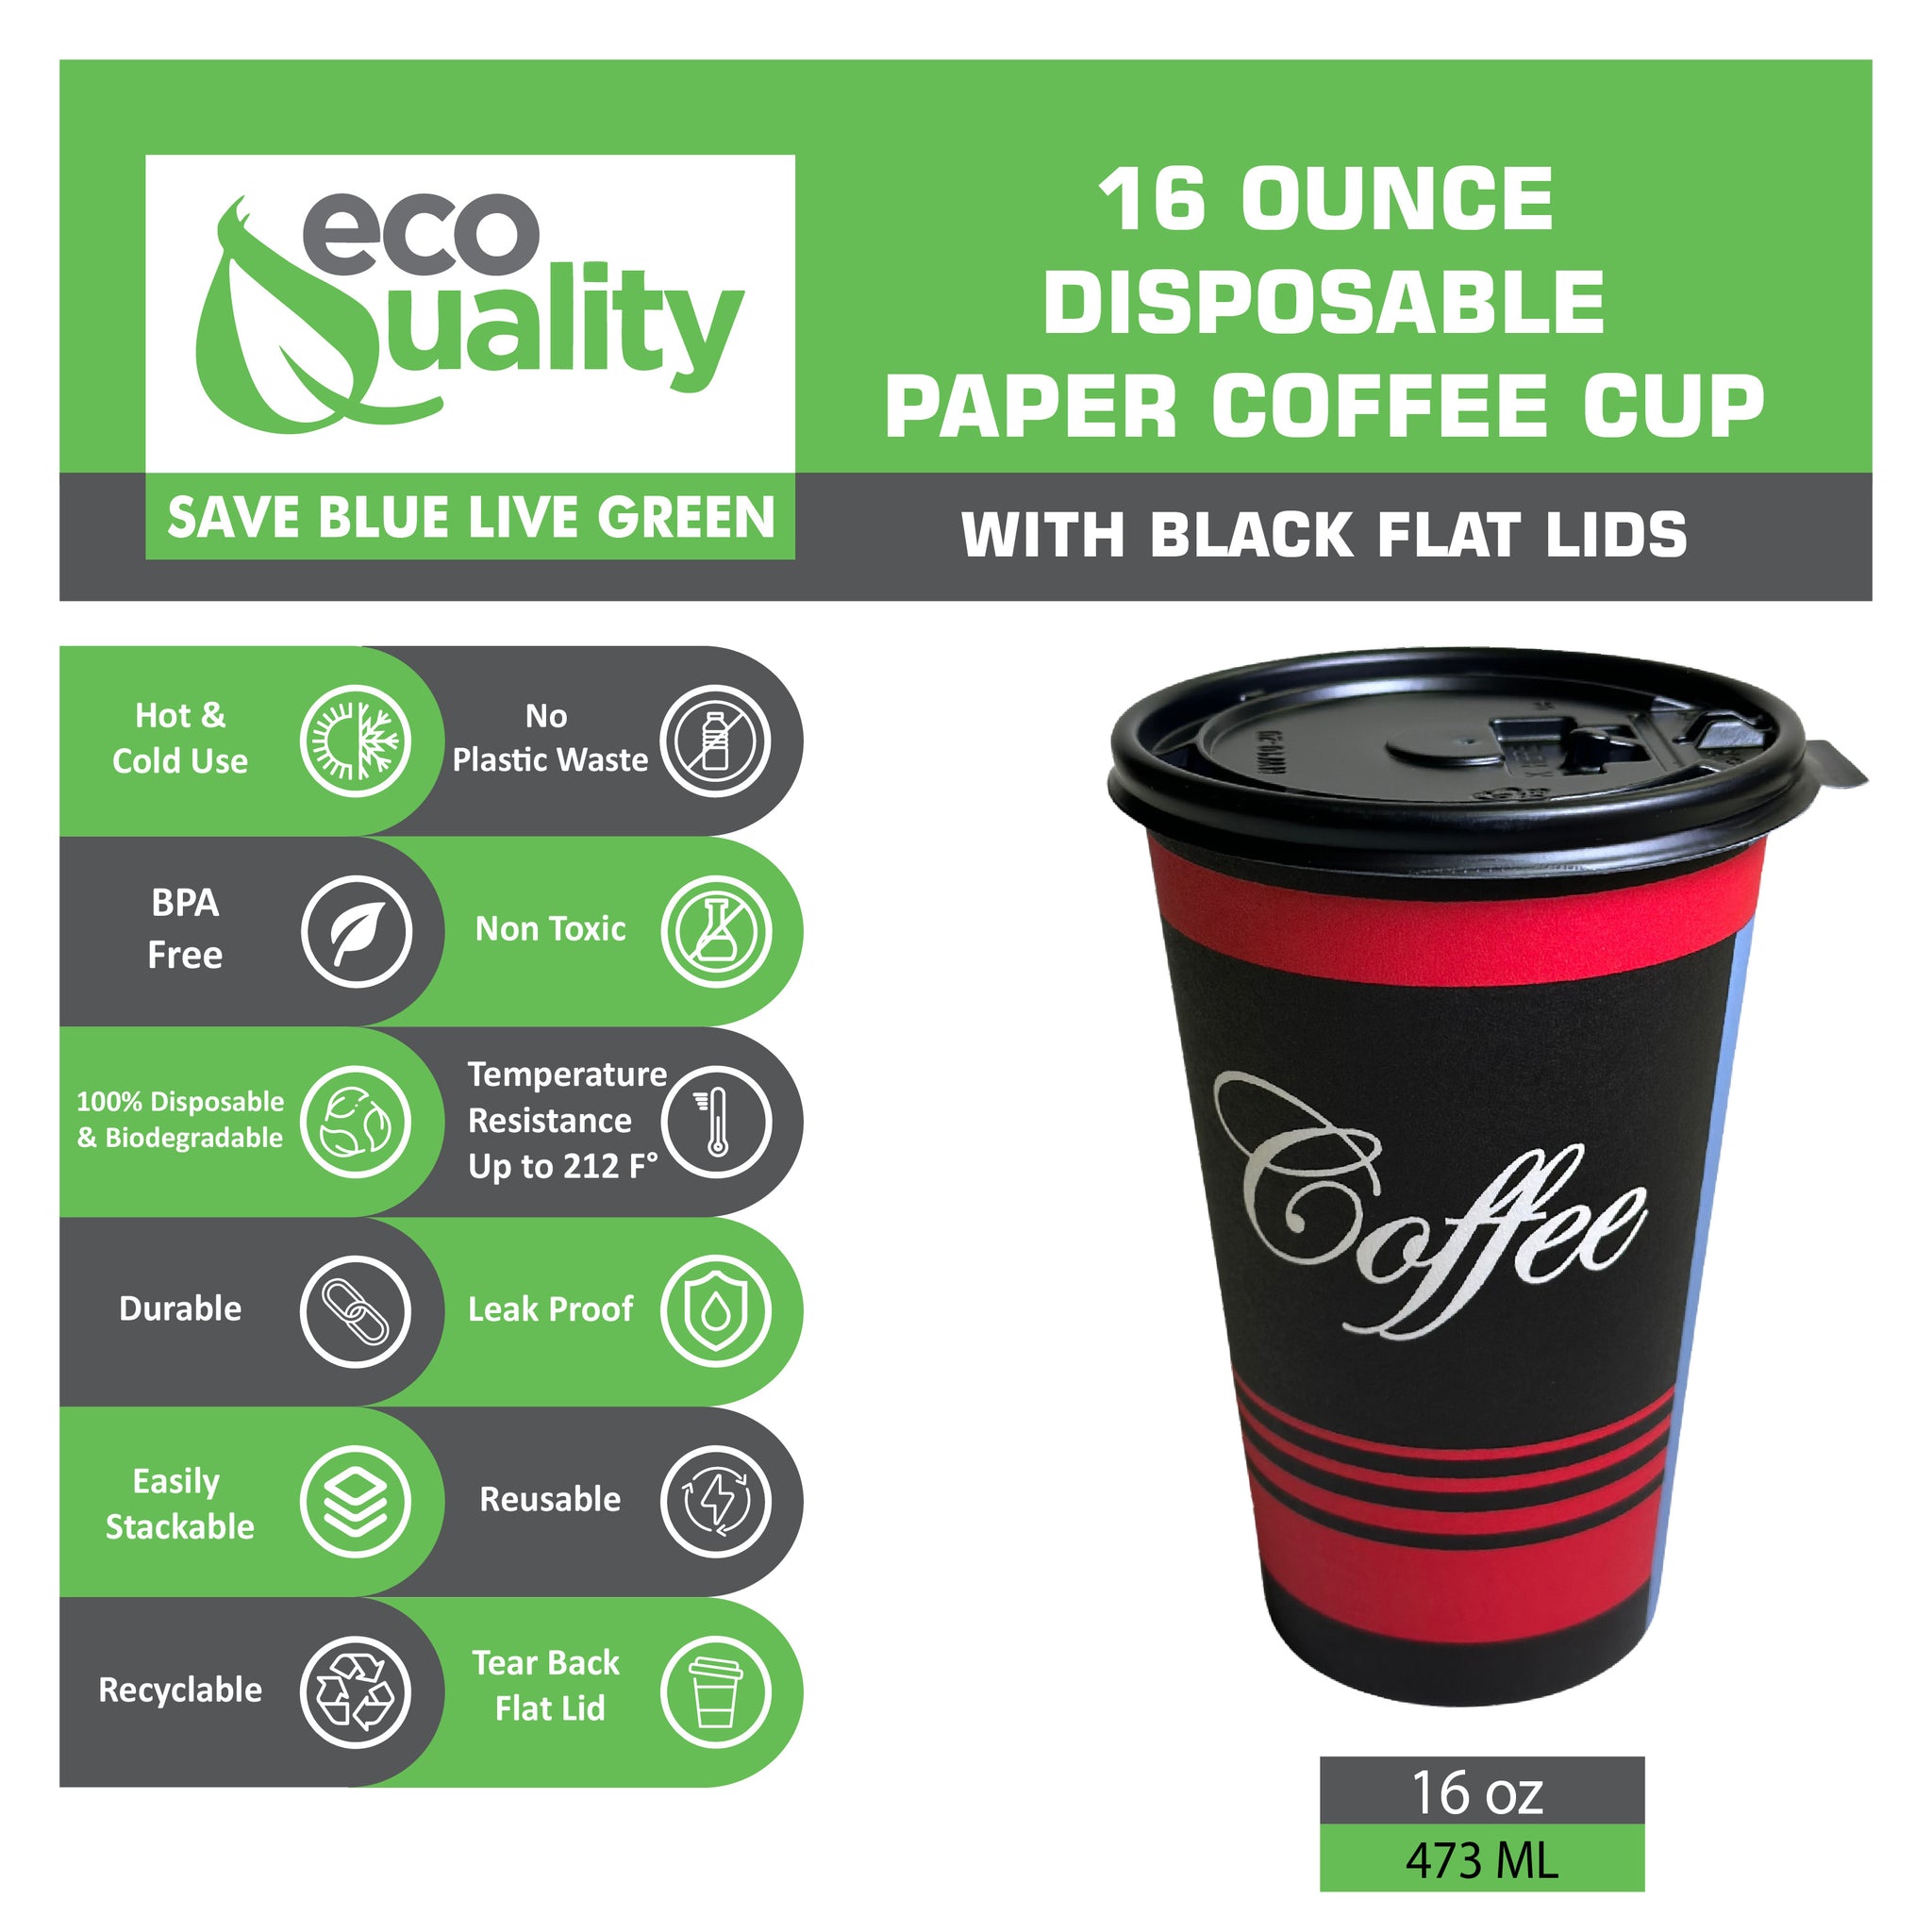 16oz Design Disposable Paper Coffee Cups with Black Flat Lids